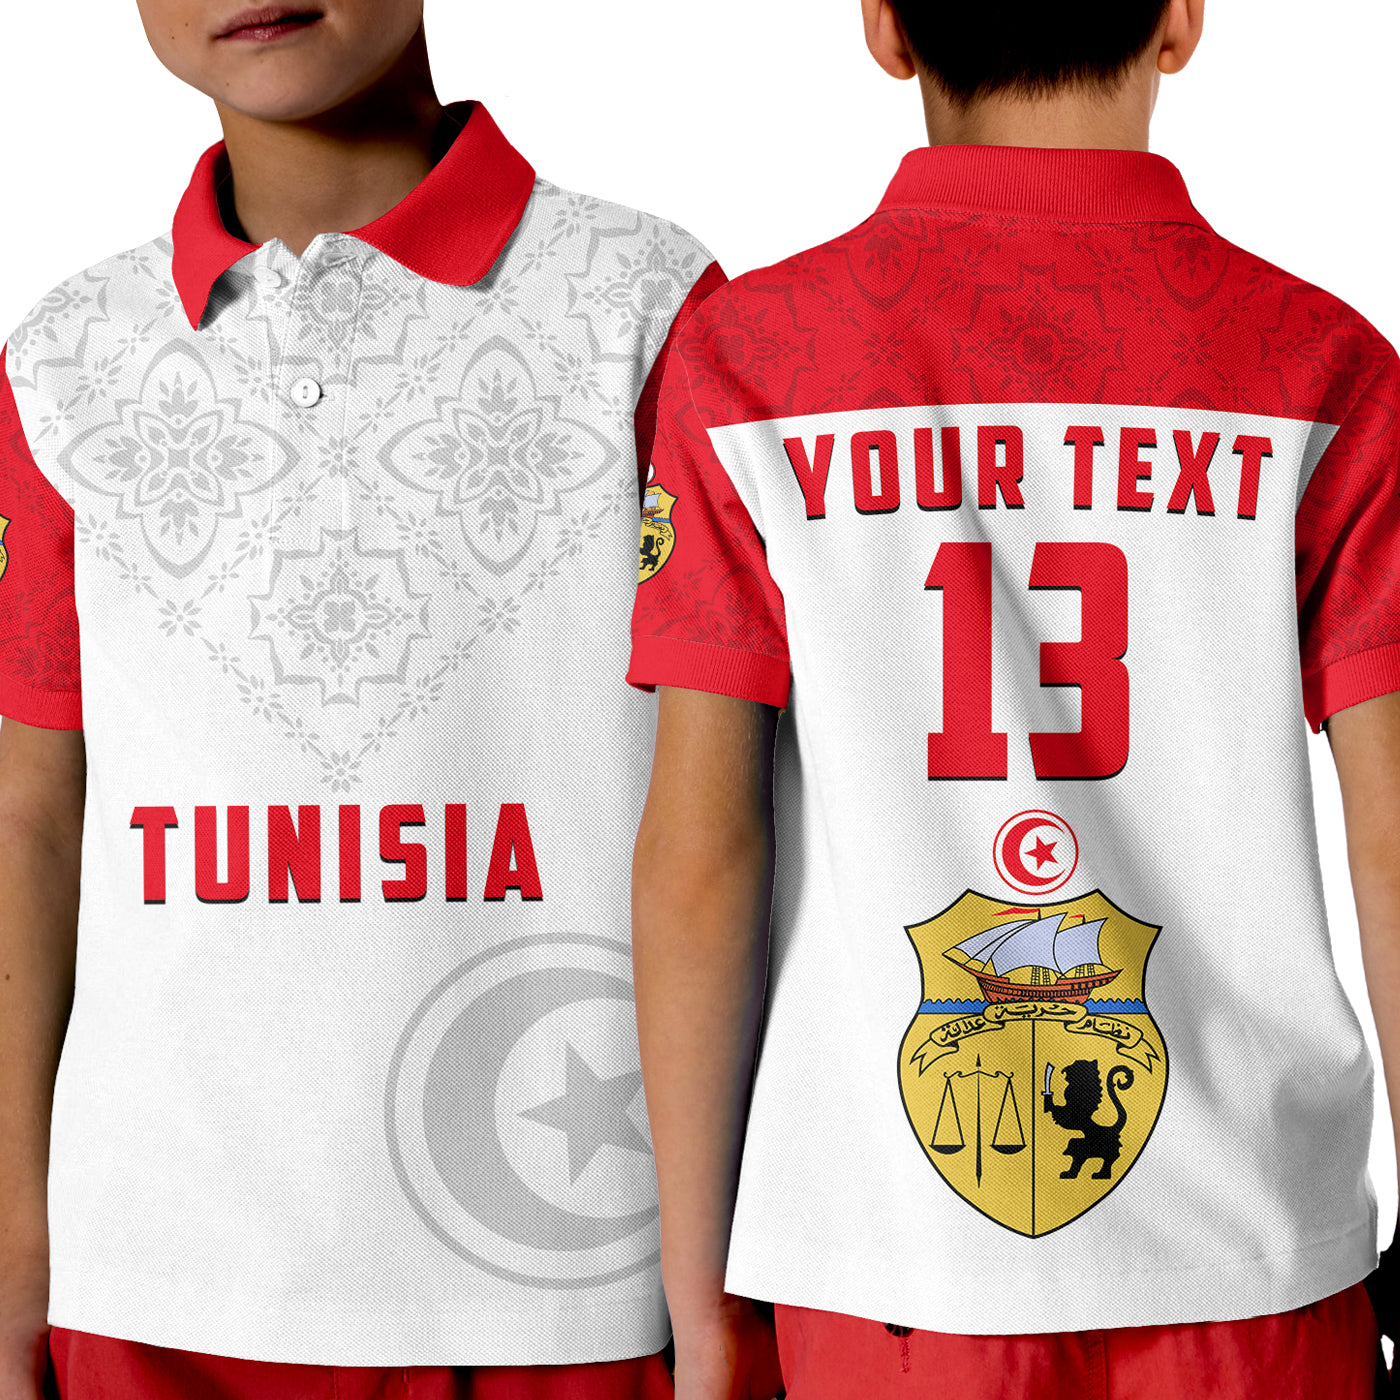 custom-text-and-number-tunisia-polo-shirt-kid-tunisian-patterns-sporty-style